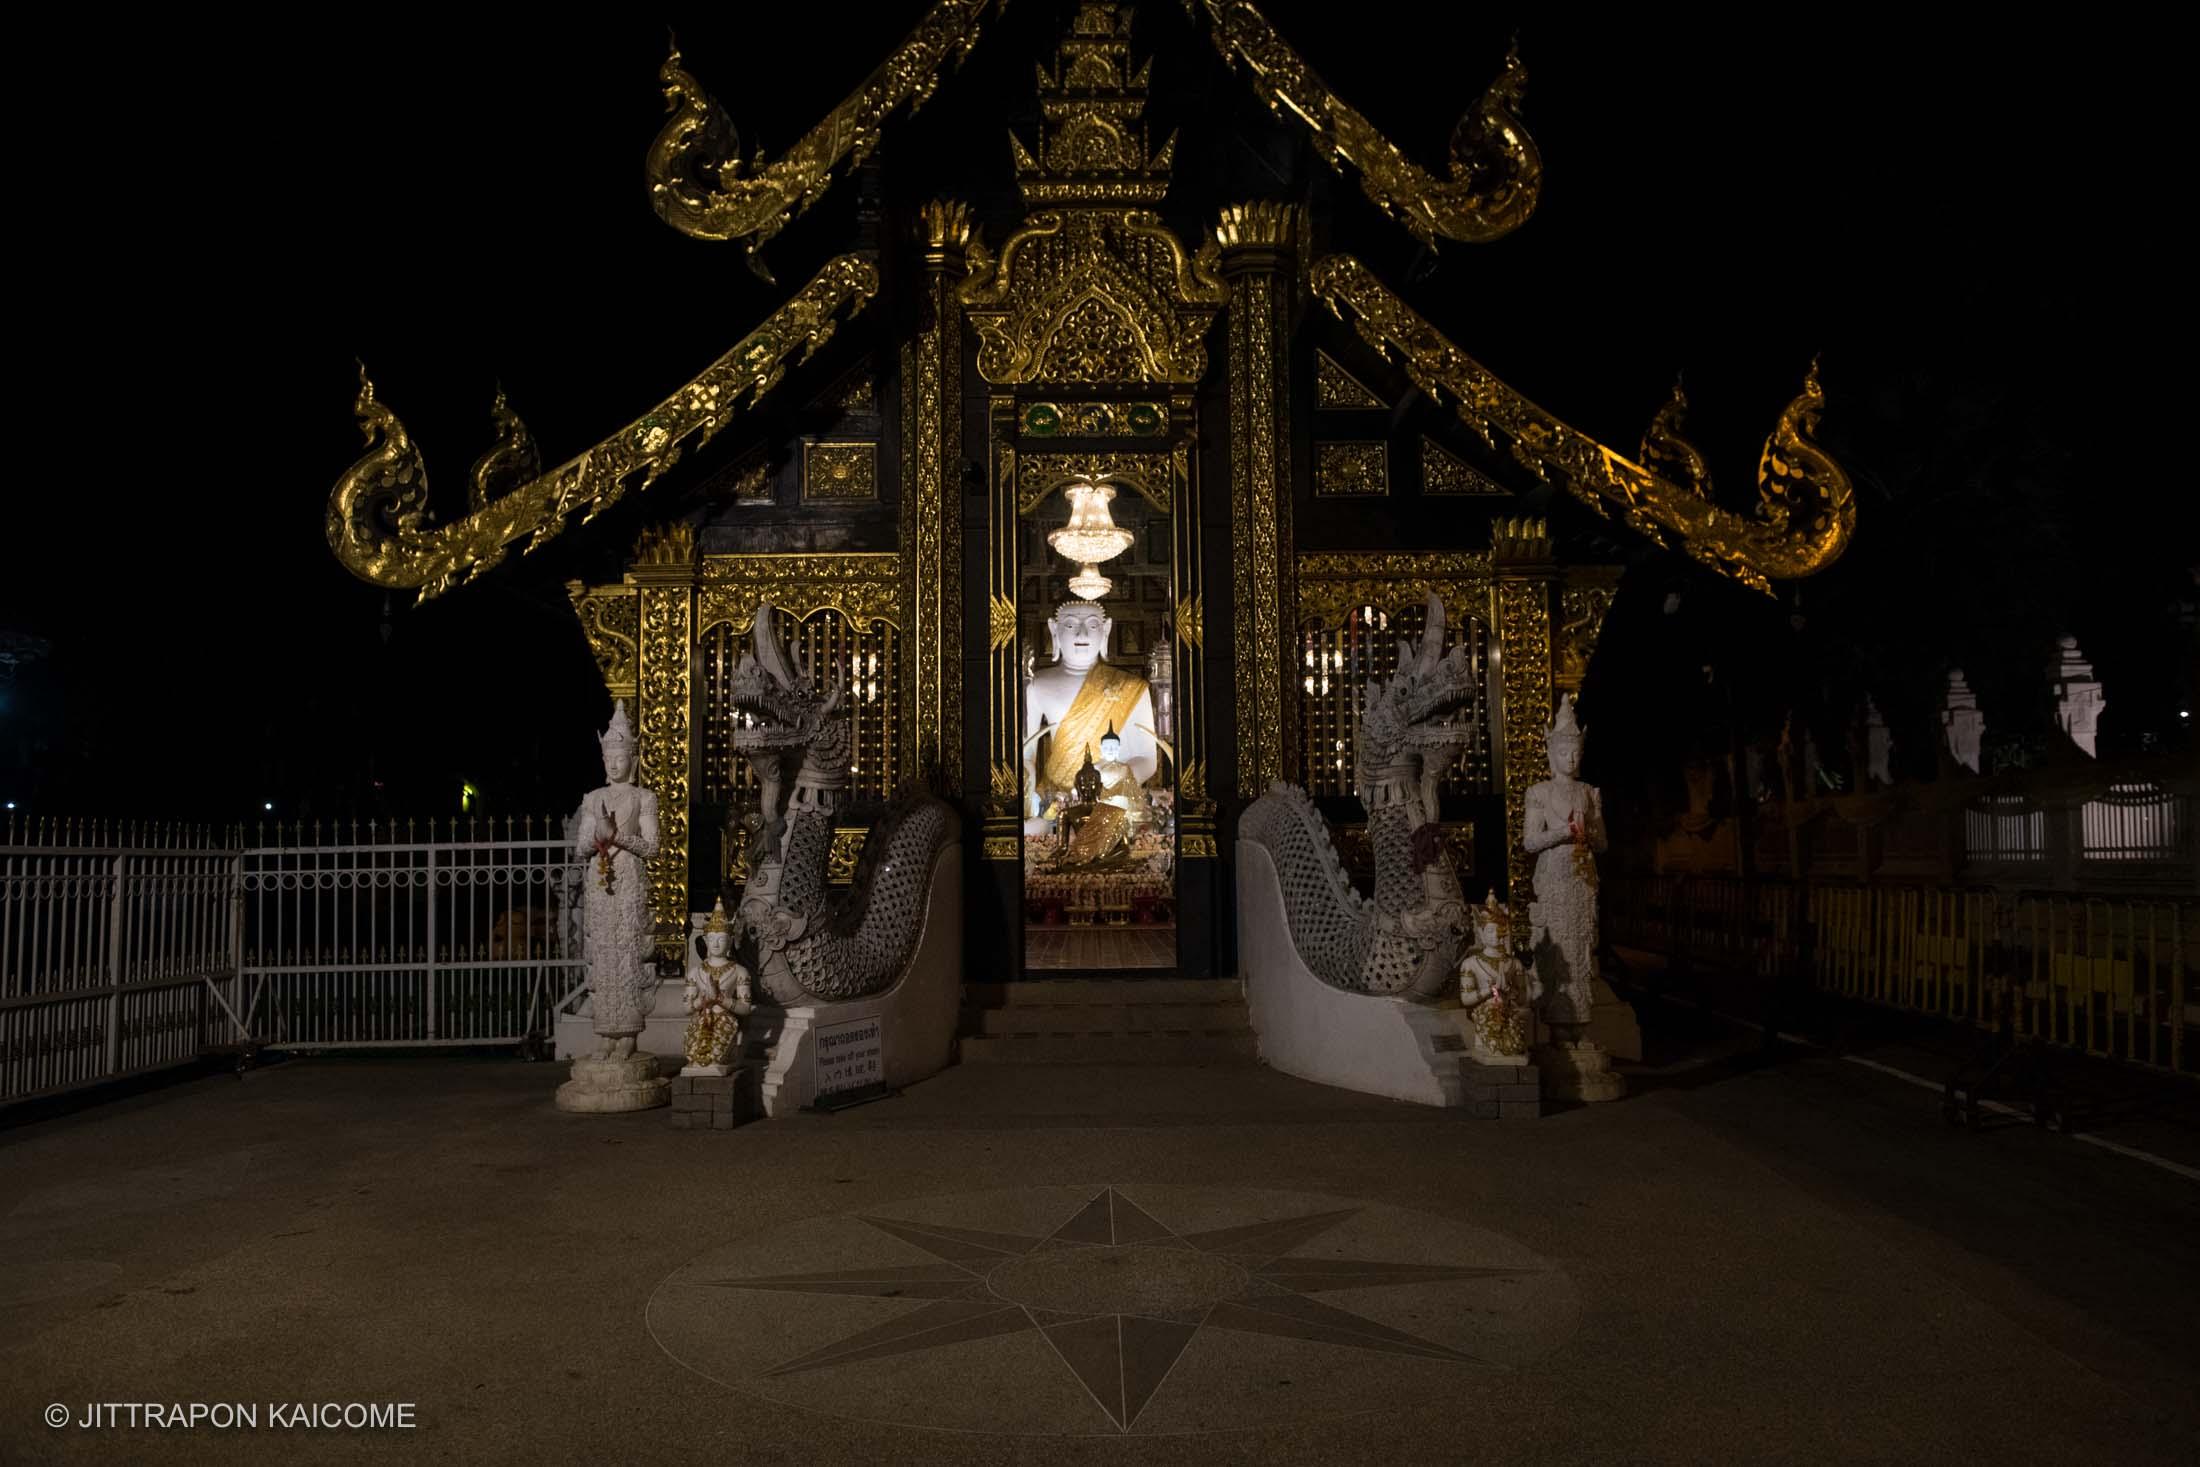 Chiang Mai During Covid-19 - 08.10 PM – Before the outbreak, Wat Inthakin, a...